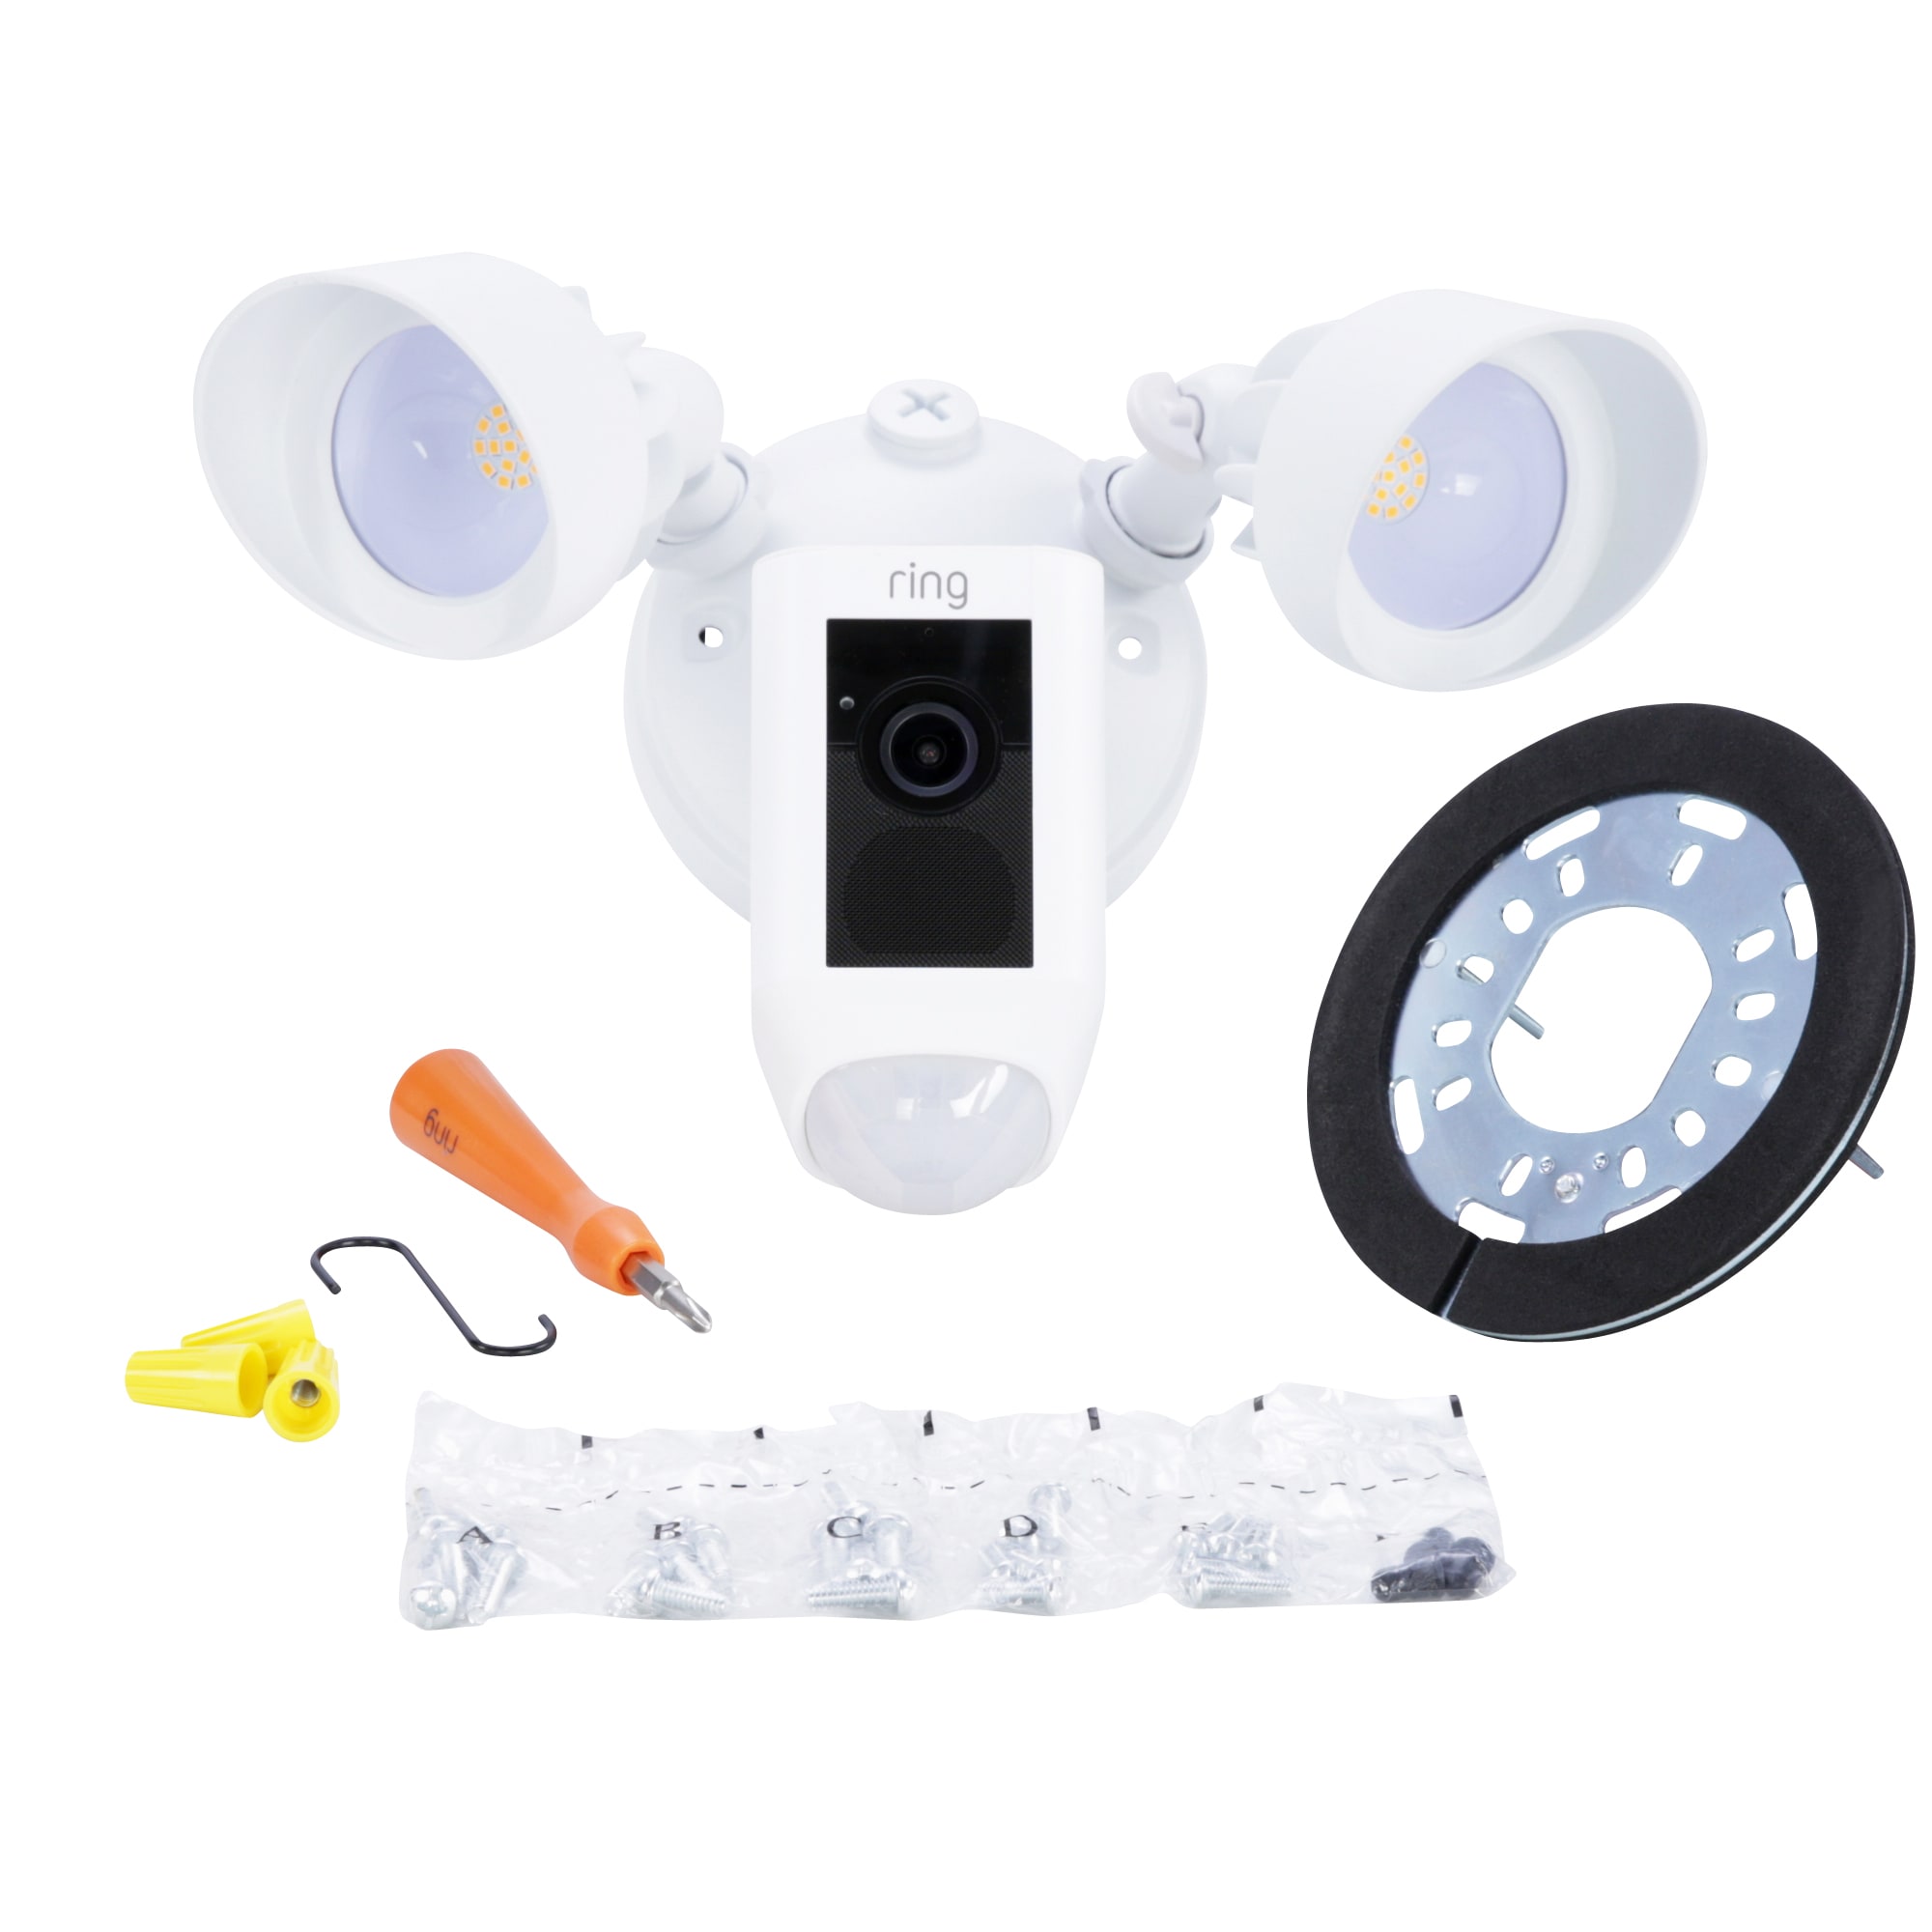 Wasserstein Ring Spotlight Cam Wired and Battery Gutter White Swivel  Tilting Security Camera Universal Mount at Lowes.com